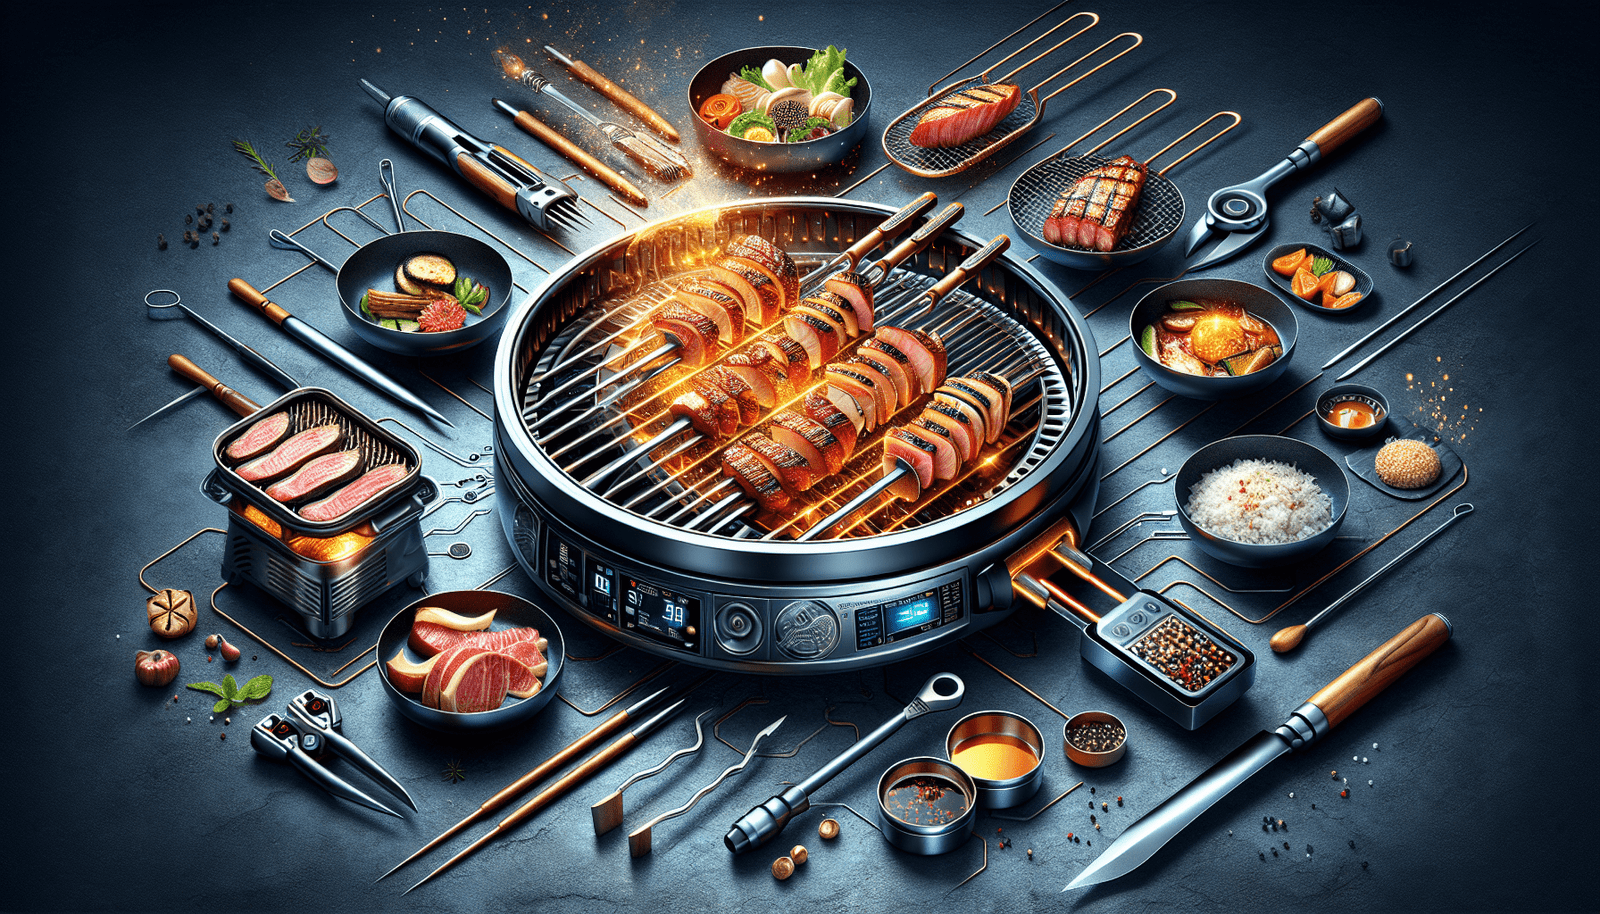 What Are The Latest Innovations In Korean Barbecue Techniques?